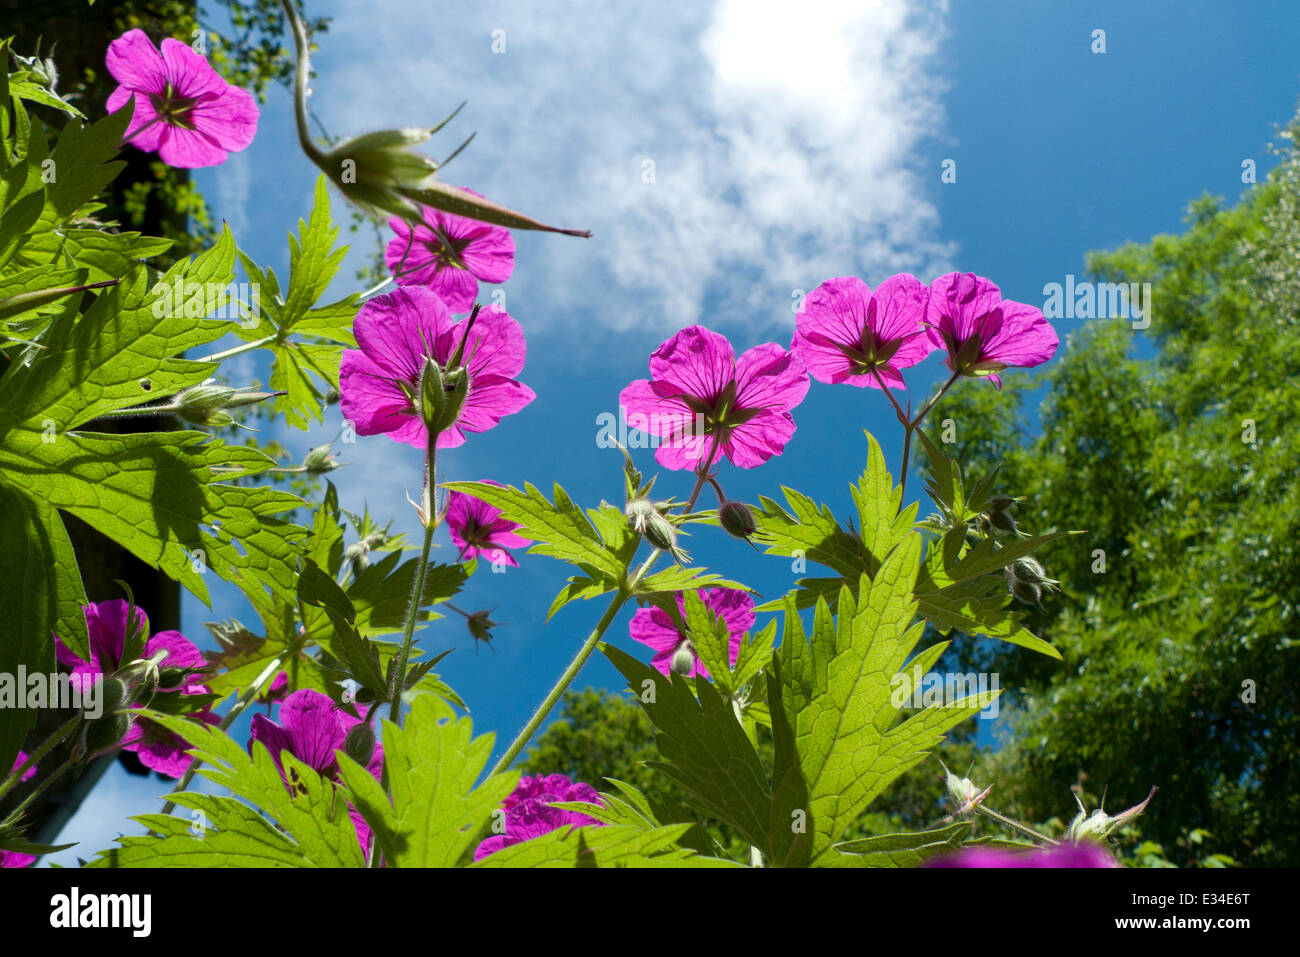 Geranium psilostemon geraniums (cranesbill) flowers growing in a rural garden viewed from low angle against a blue summer sky Carmarthenshire Wales UK.  KATHY DEWITT Stock Photo